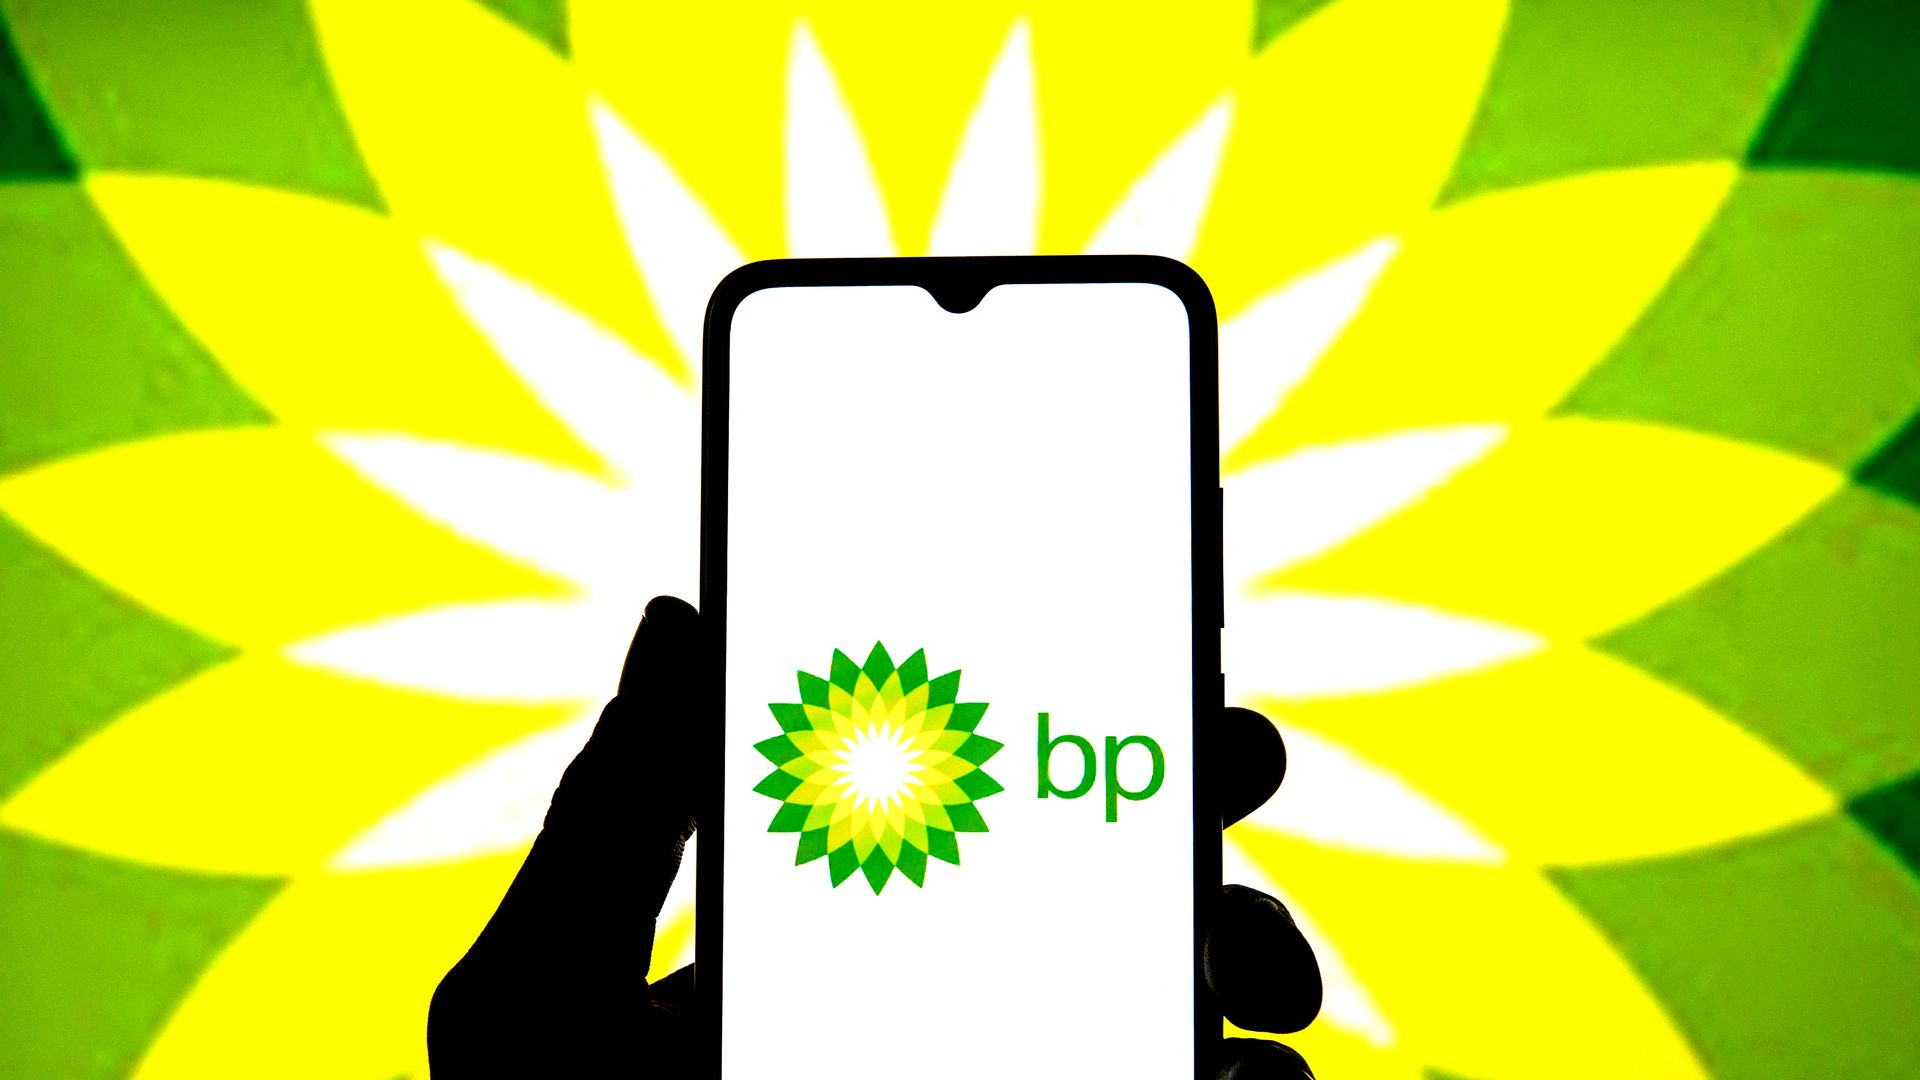 Photo of the BP logo on a phone